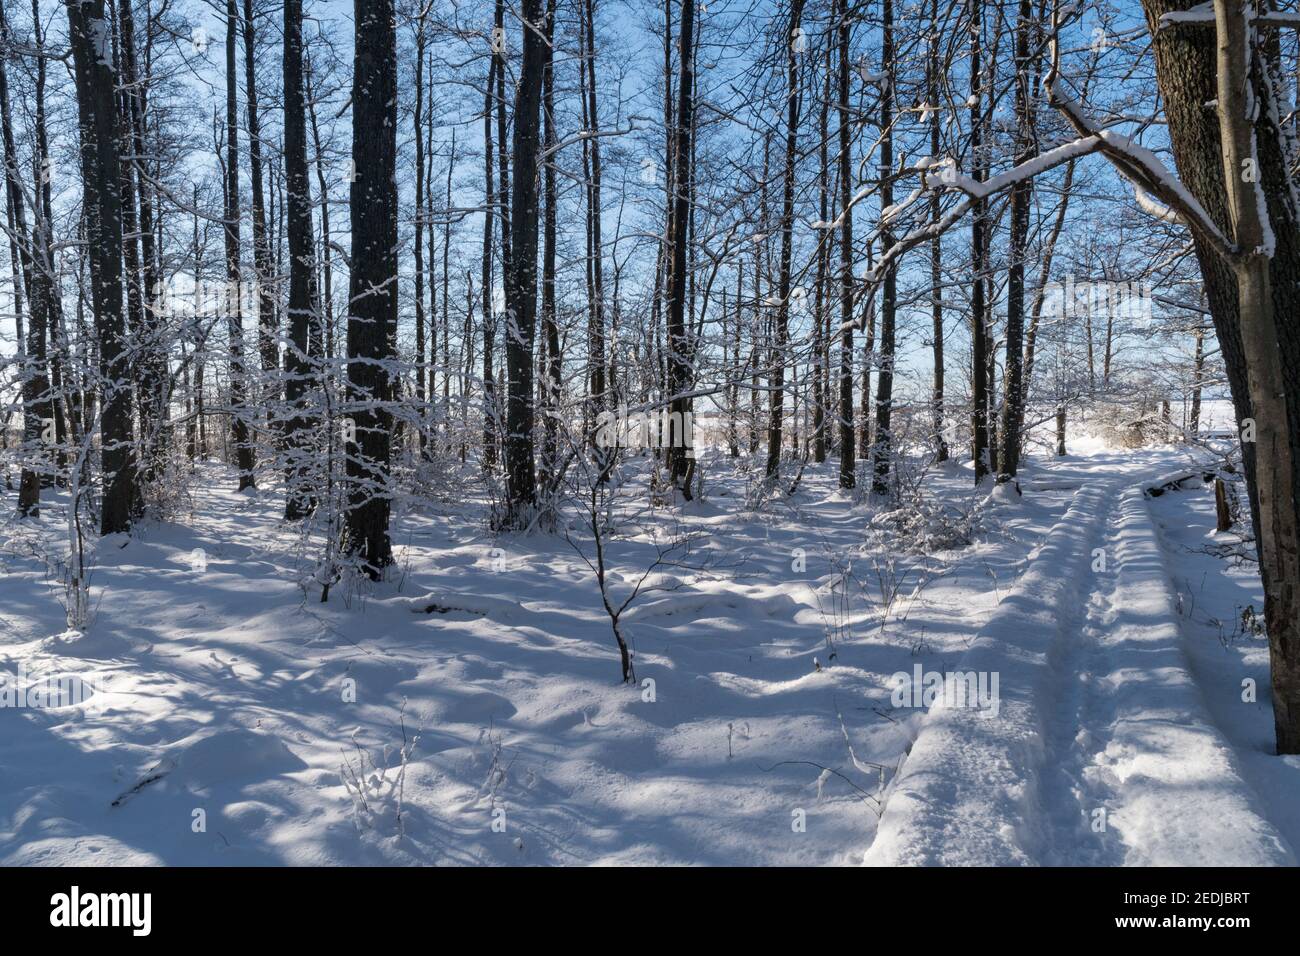 Trail through a bright and snowy forest in winter season Stock Photo